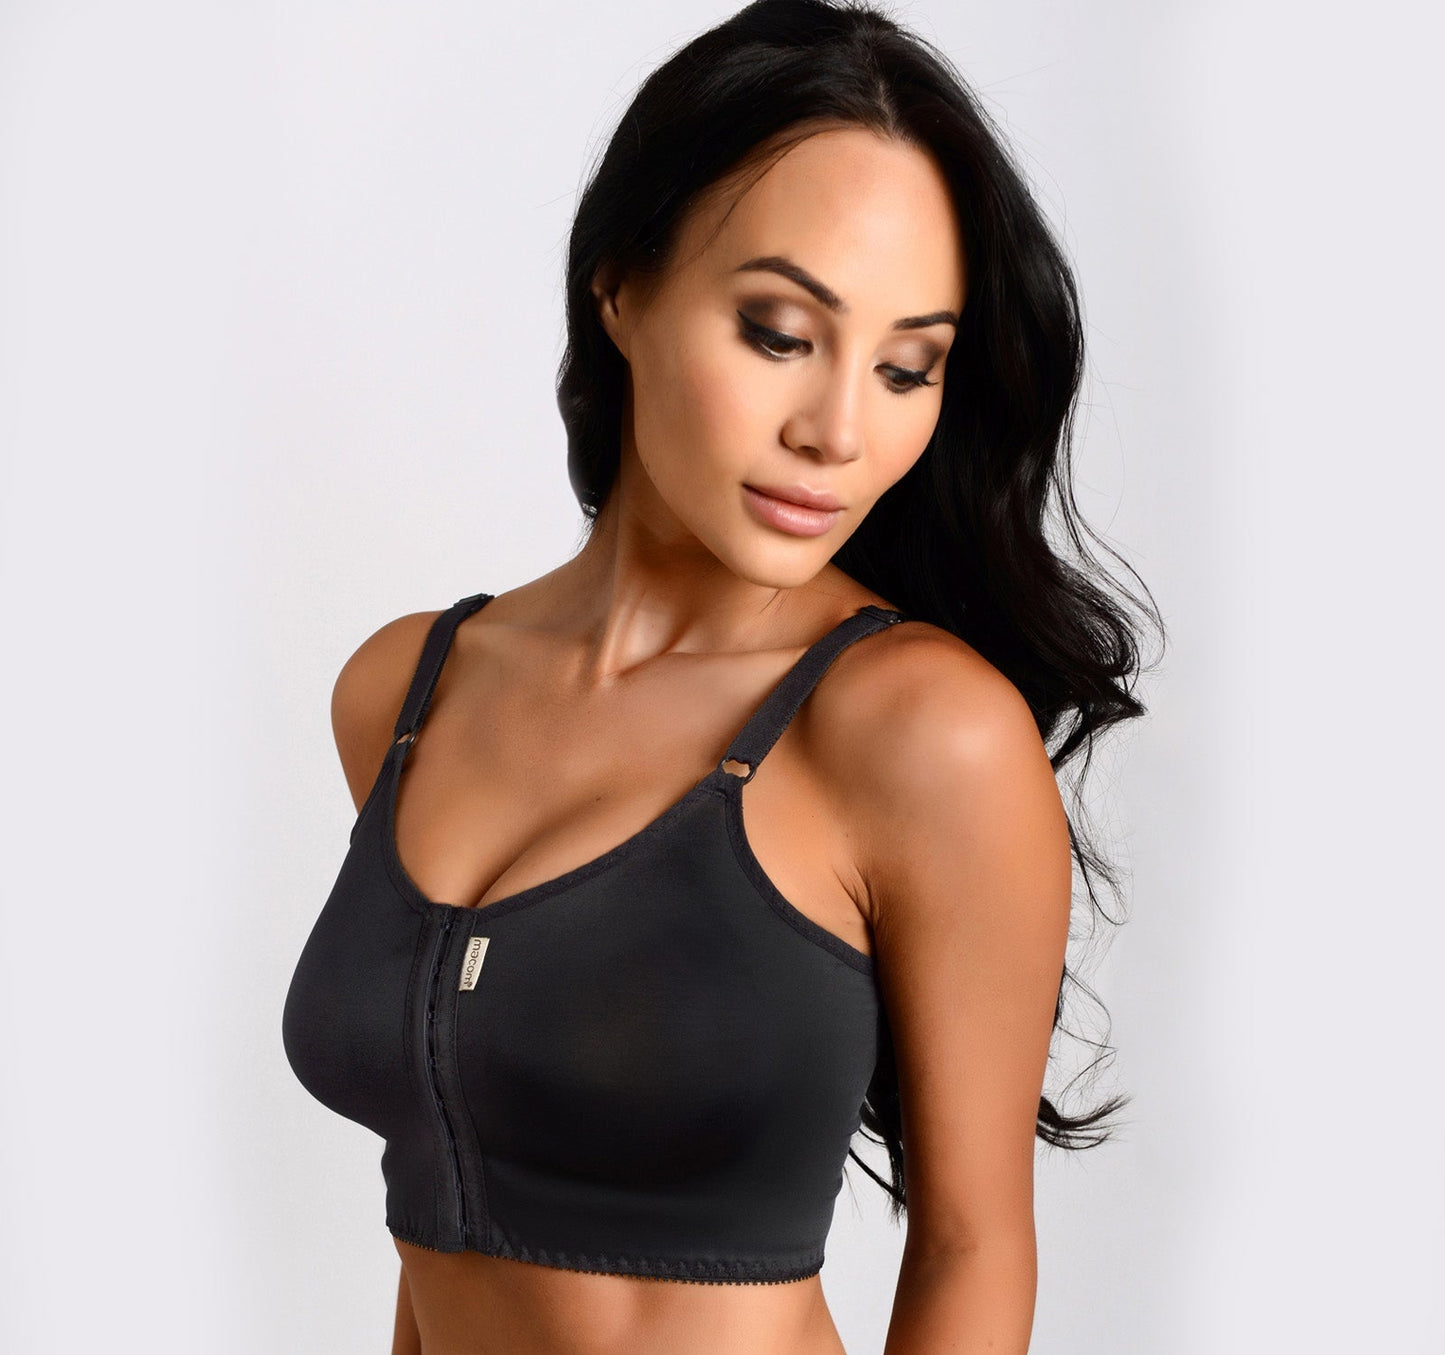 Compression Bras  Post-Surgery Recovery Compression Bras activewear top  - The Marena Group, LLC